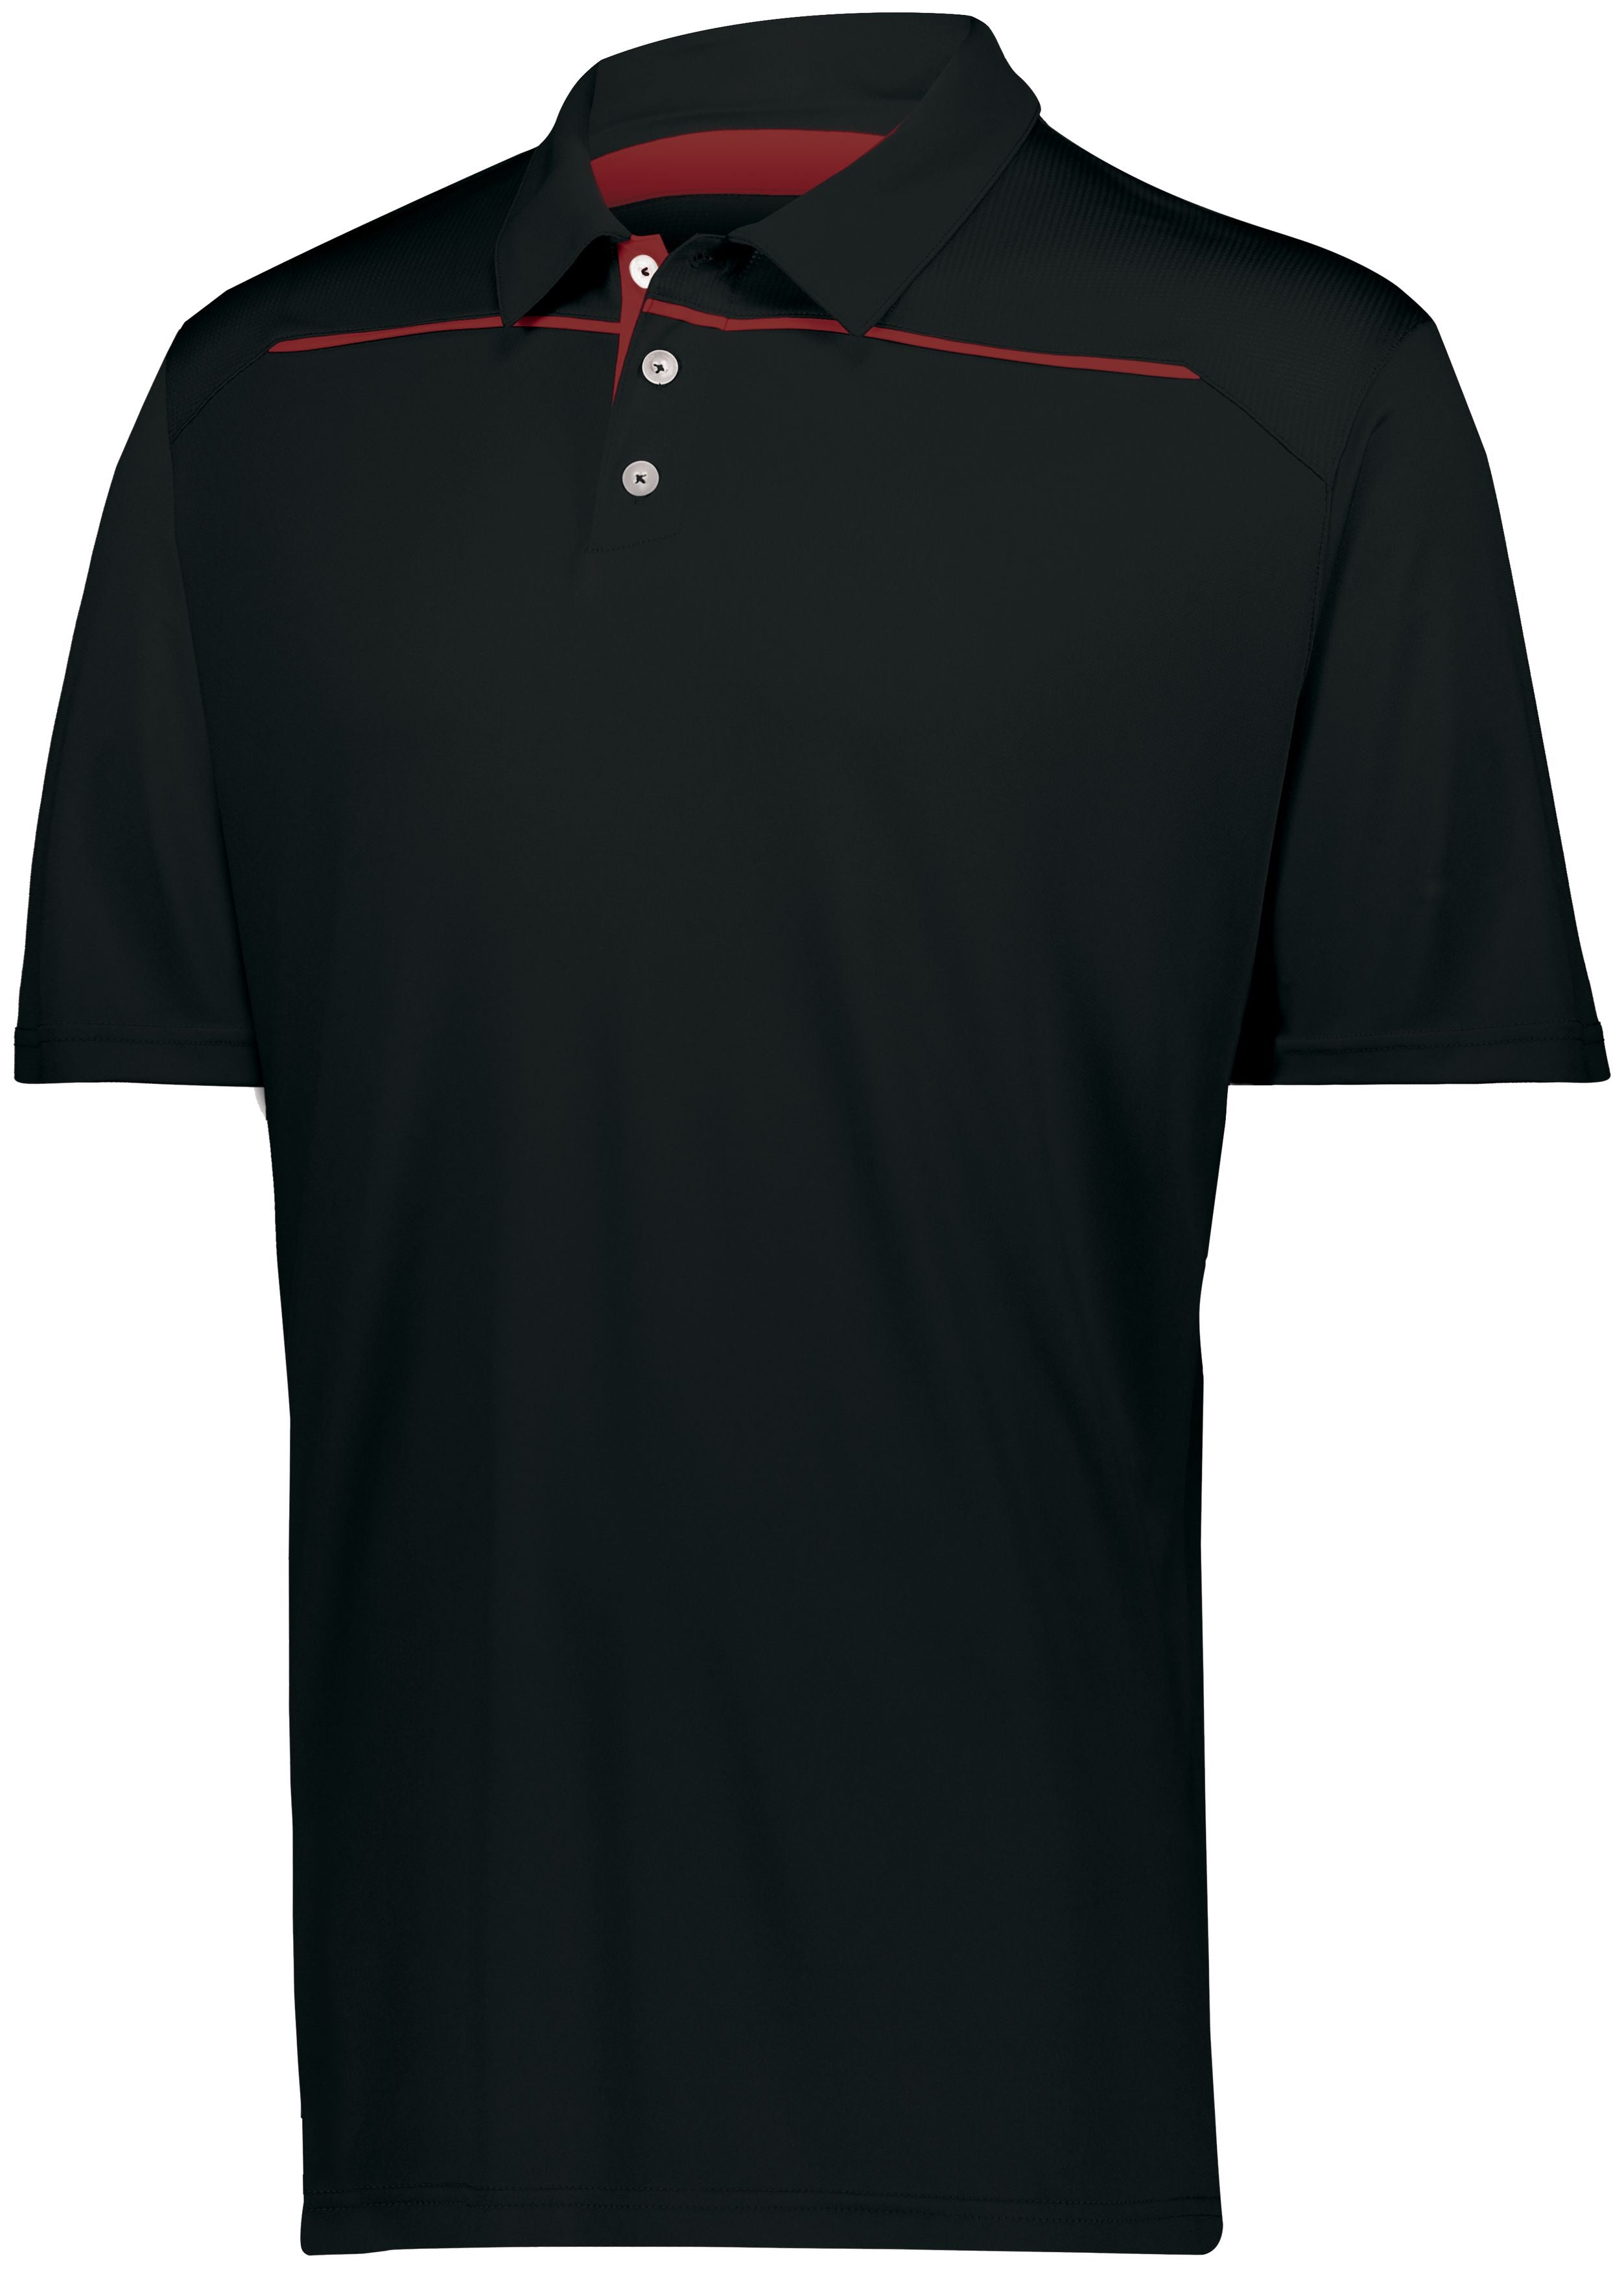 Holloway Defer Polo in Black/Scarlet  -Part of the Adult, Adult-Polos, Polos, Holloway, Shirts product lines at KanaleyCreations.com